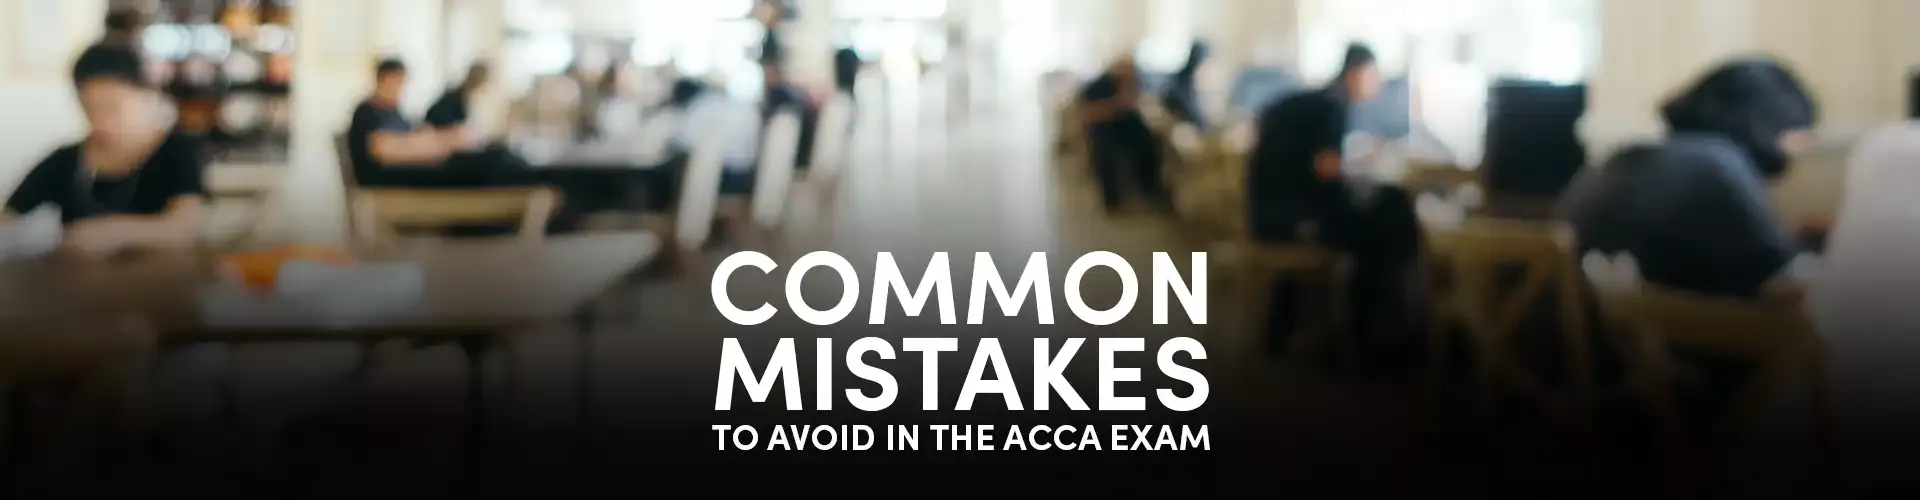 Common Mistakes to Avoid in the ACCA Exam